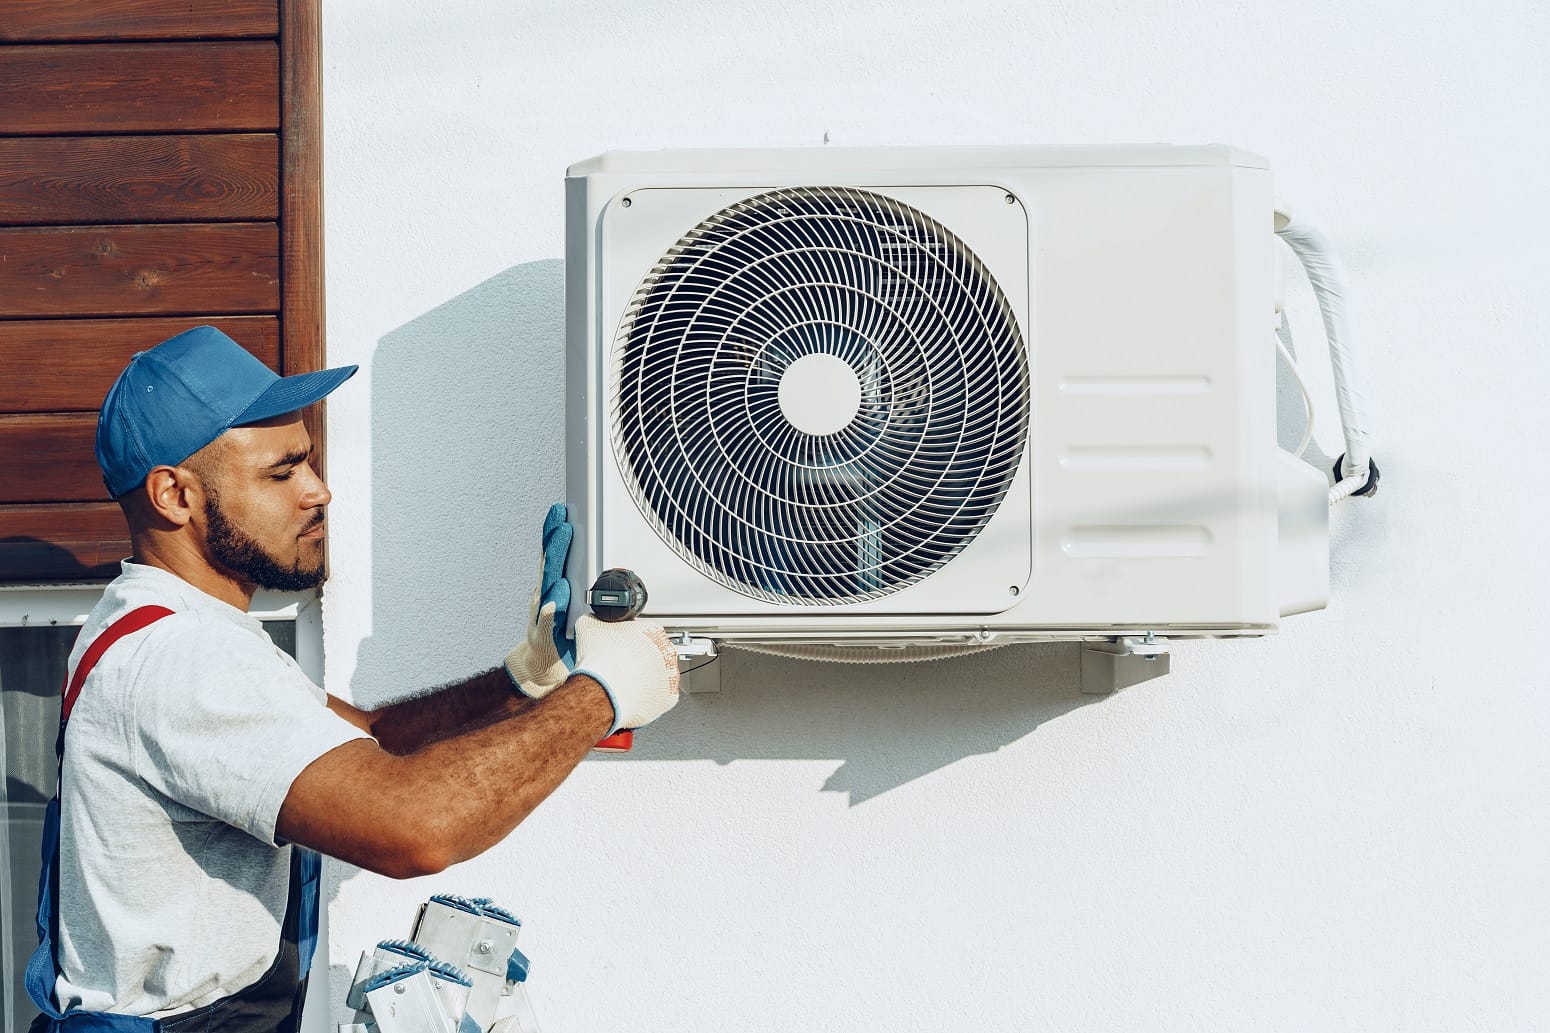 Why Choose Yuslih for Air Conditioner Repair, Installation & Maintenance Services?